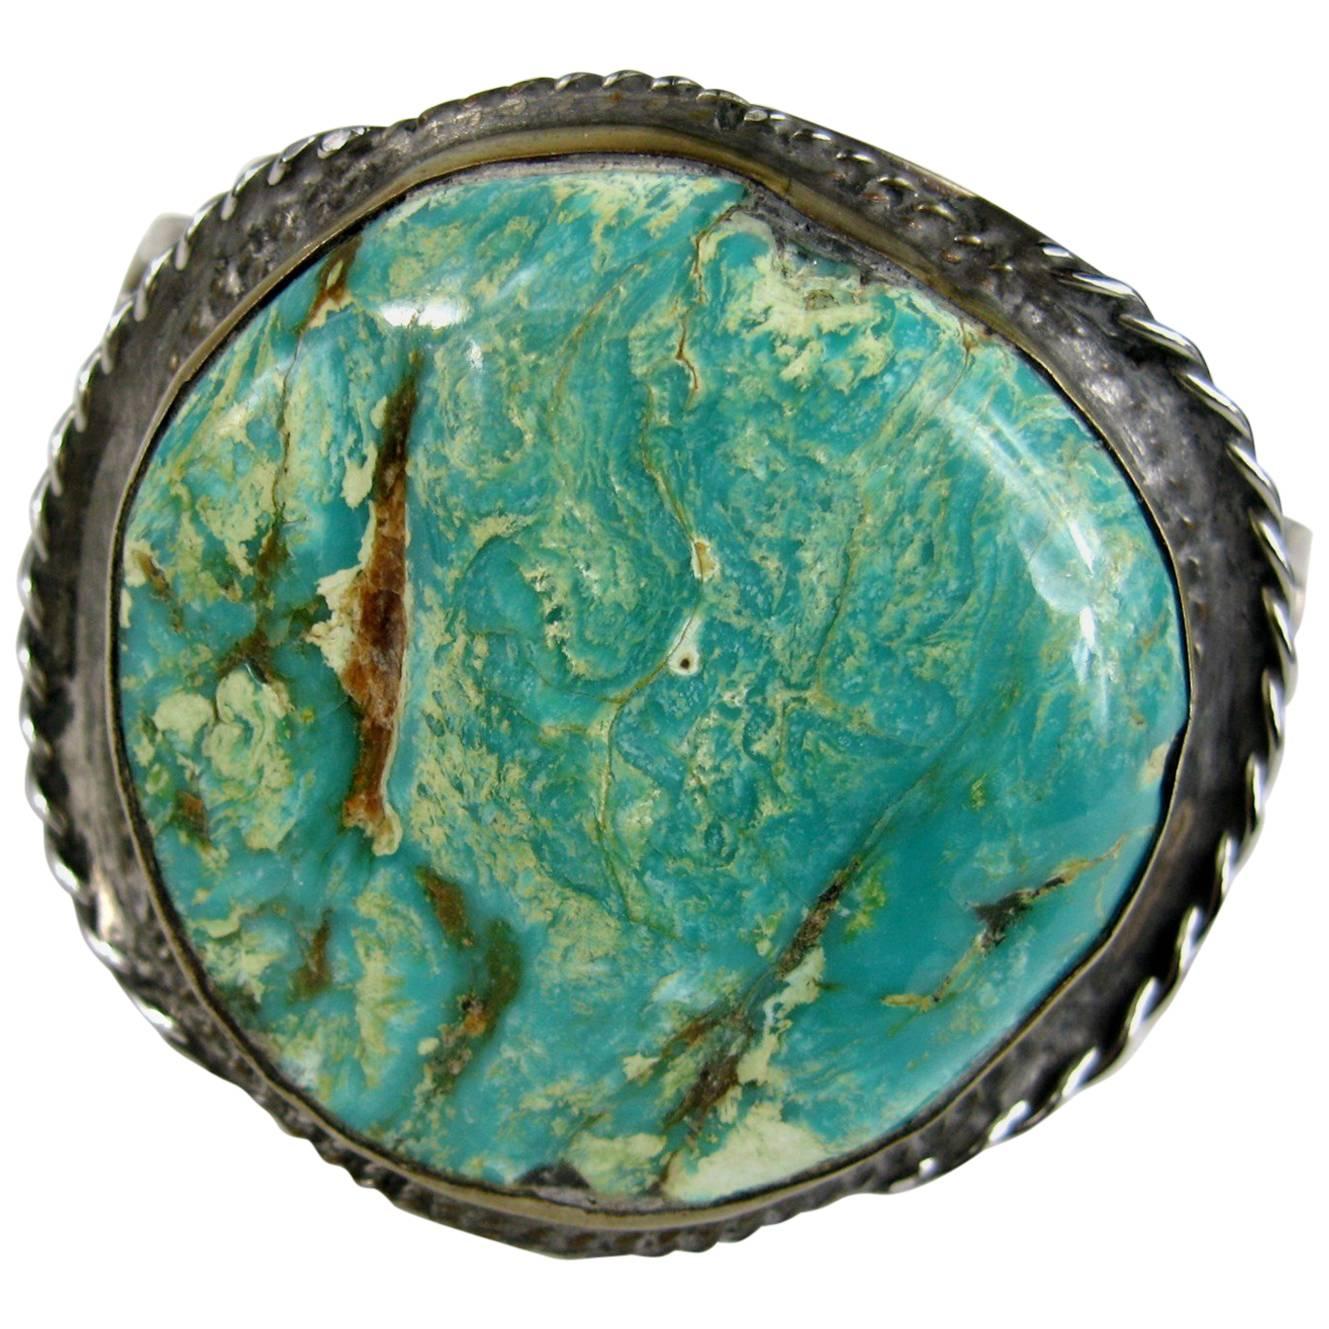 Early hand crafted Navajo Turquoise Cuff Bracelet which features a very large stone, measuring approximately 1.82 inches x 1.82 inches. Set in a Silver 3 ring Cuff bracelet. Hallmarked on the back with a image of a bird. Measuring 2 inches top to